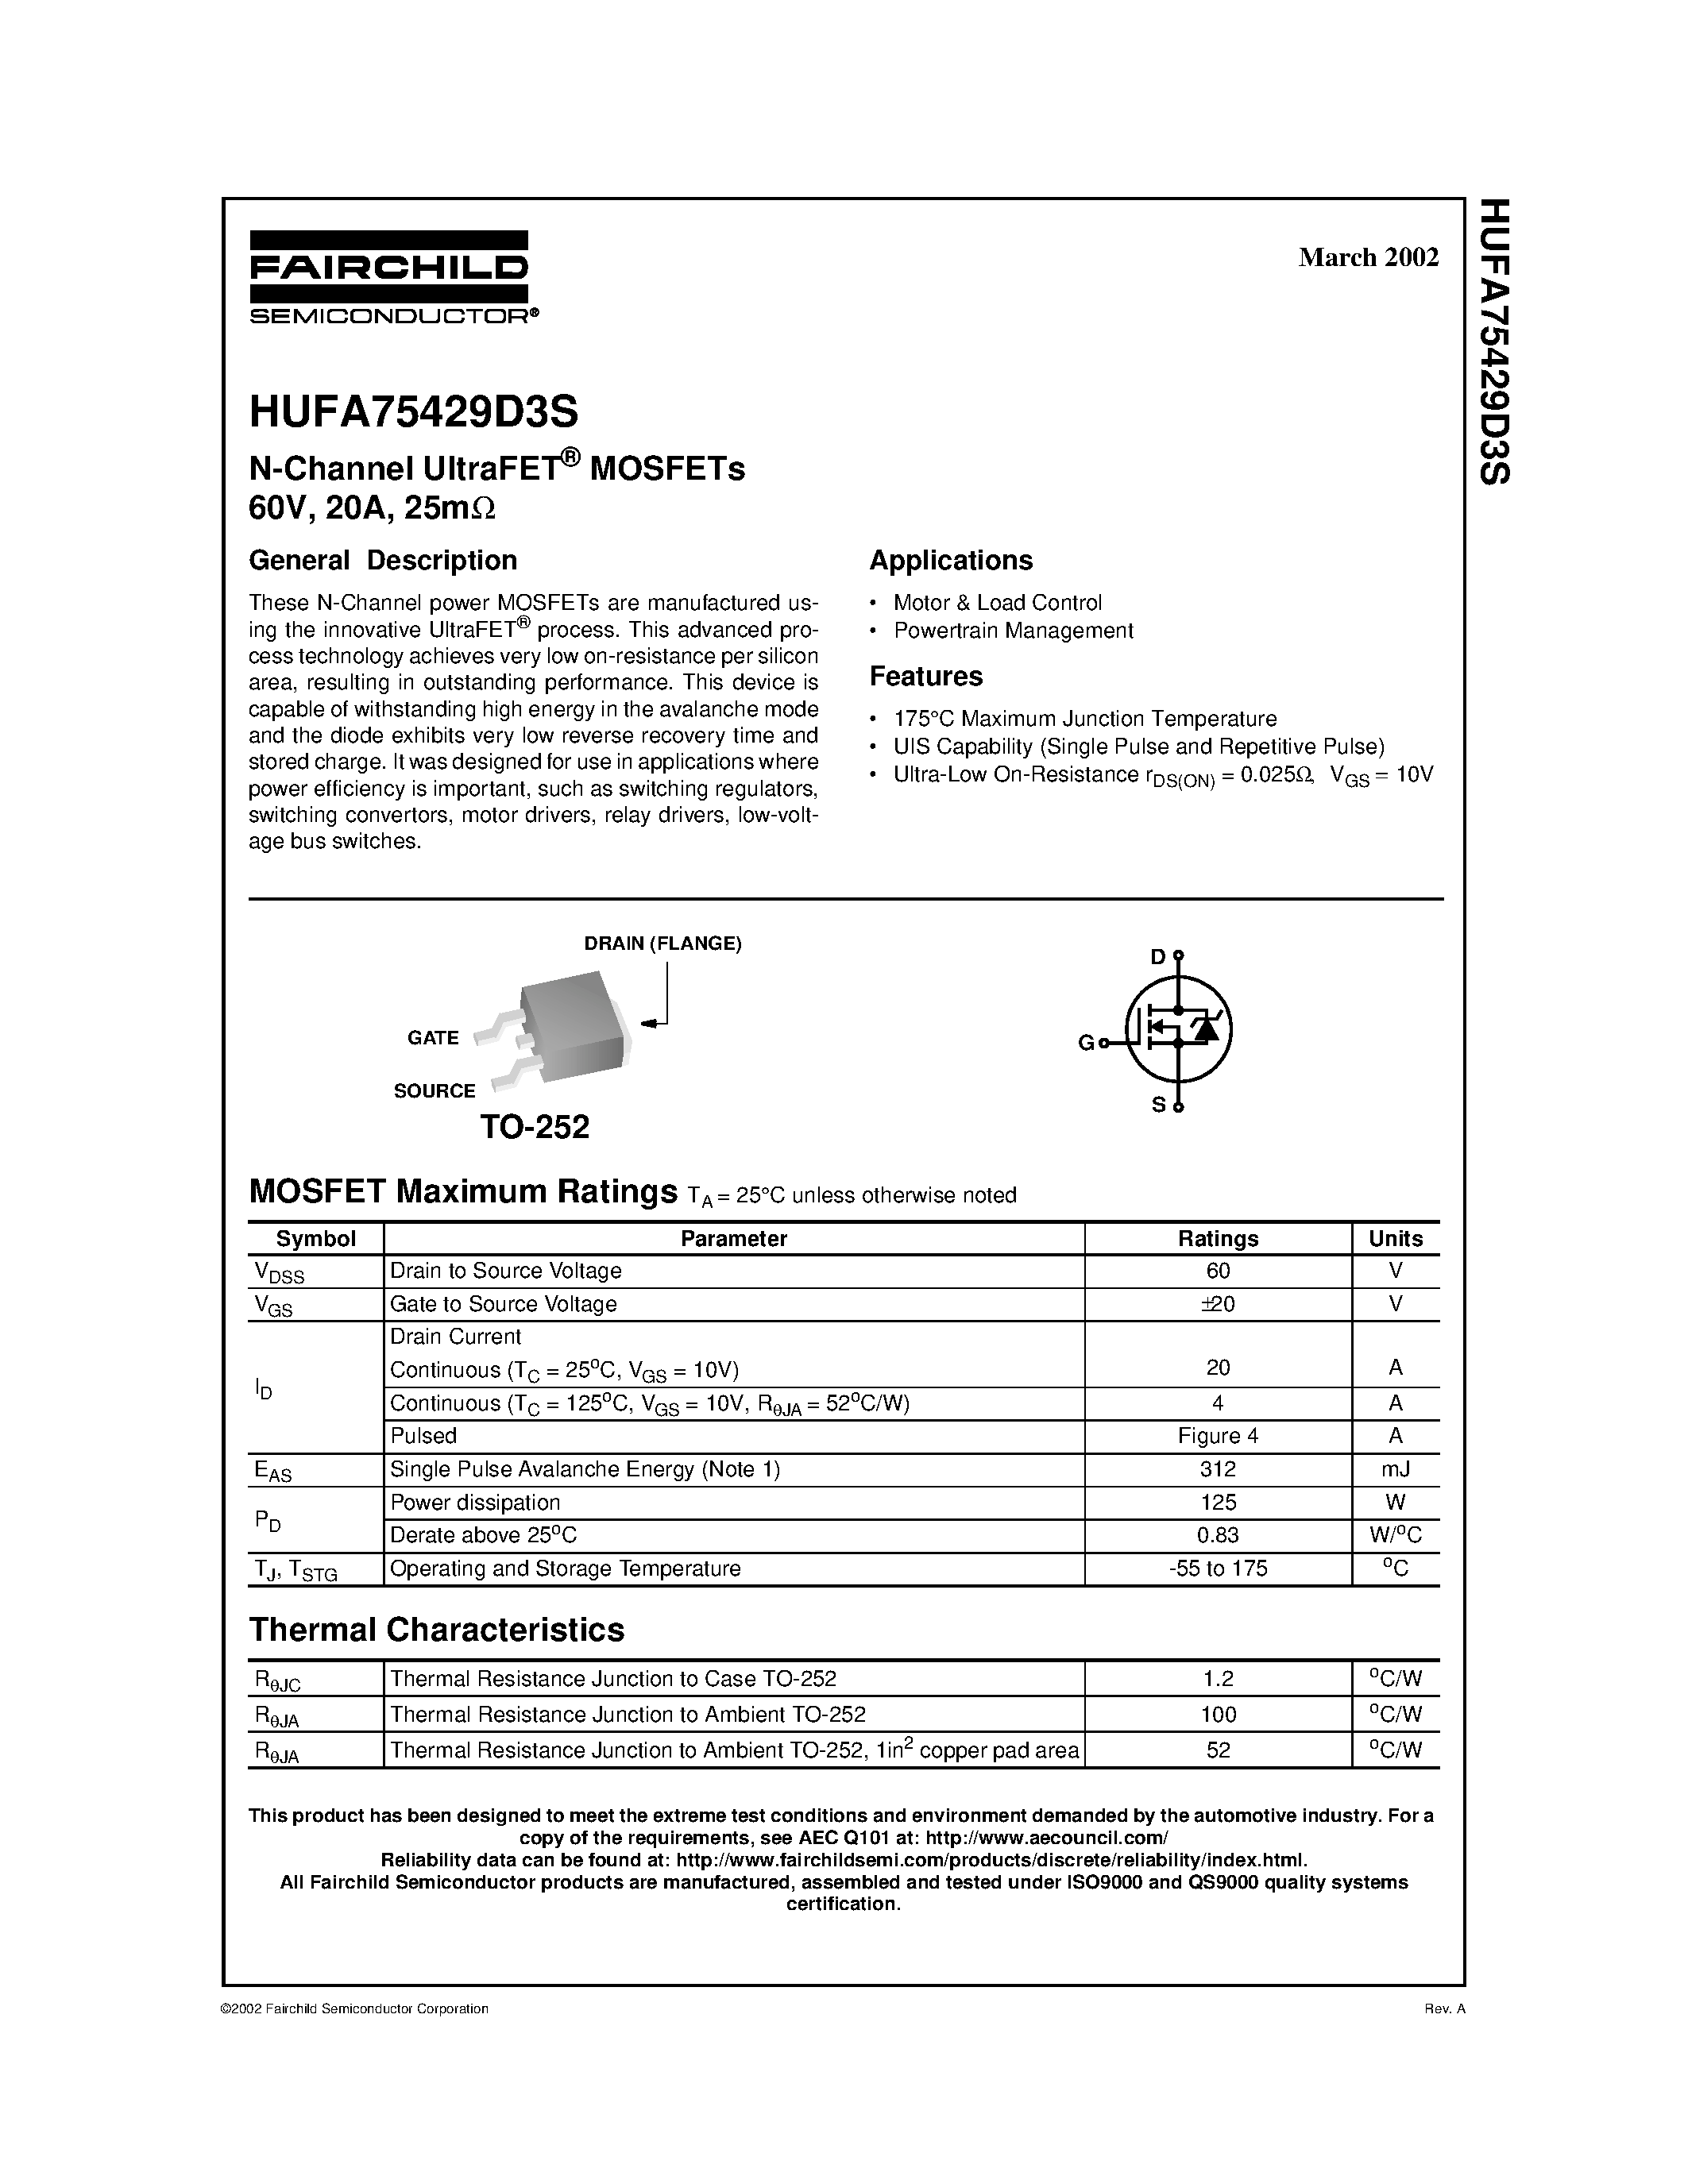 Datasheet HUFA75429D3S - N-Channel UltraFET MOSFETs 60V/ 20A/ 25m page 1